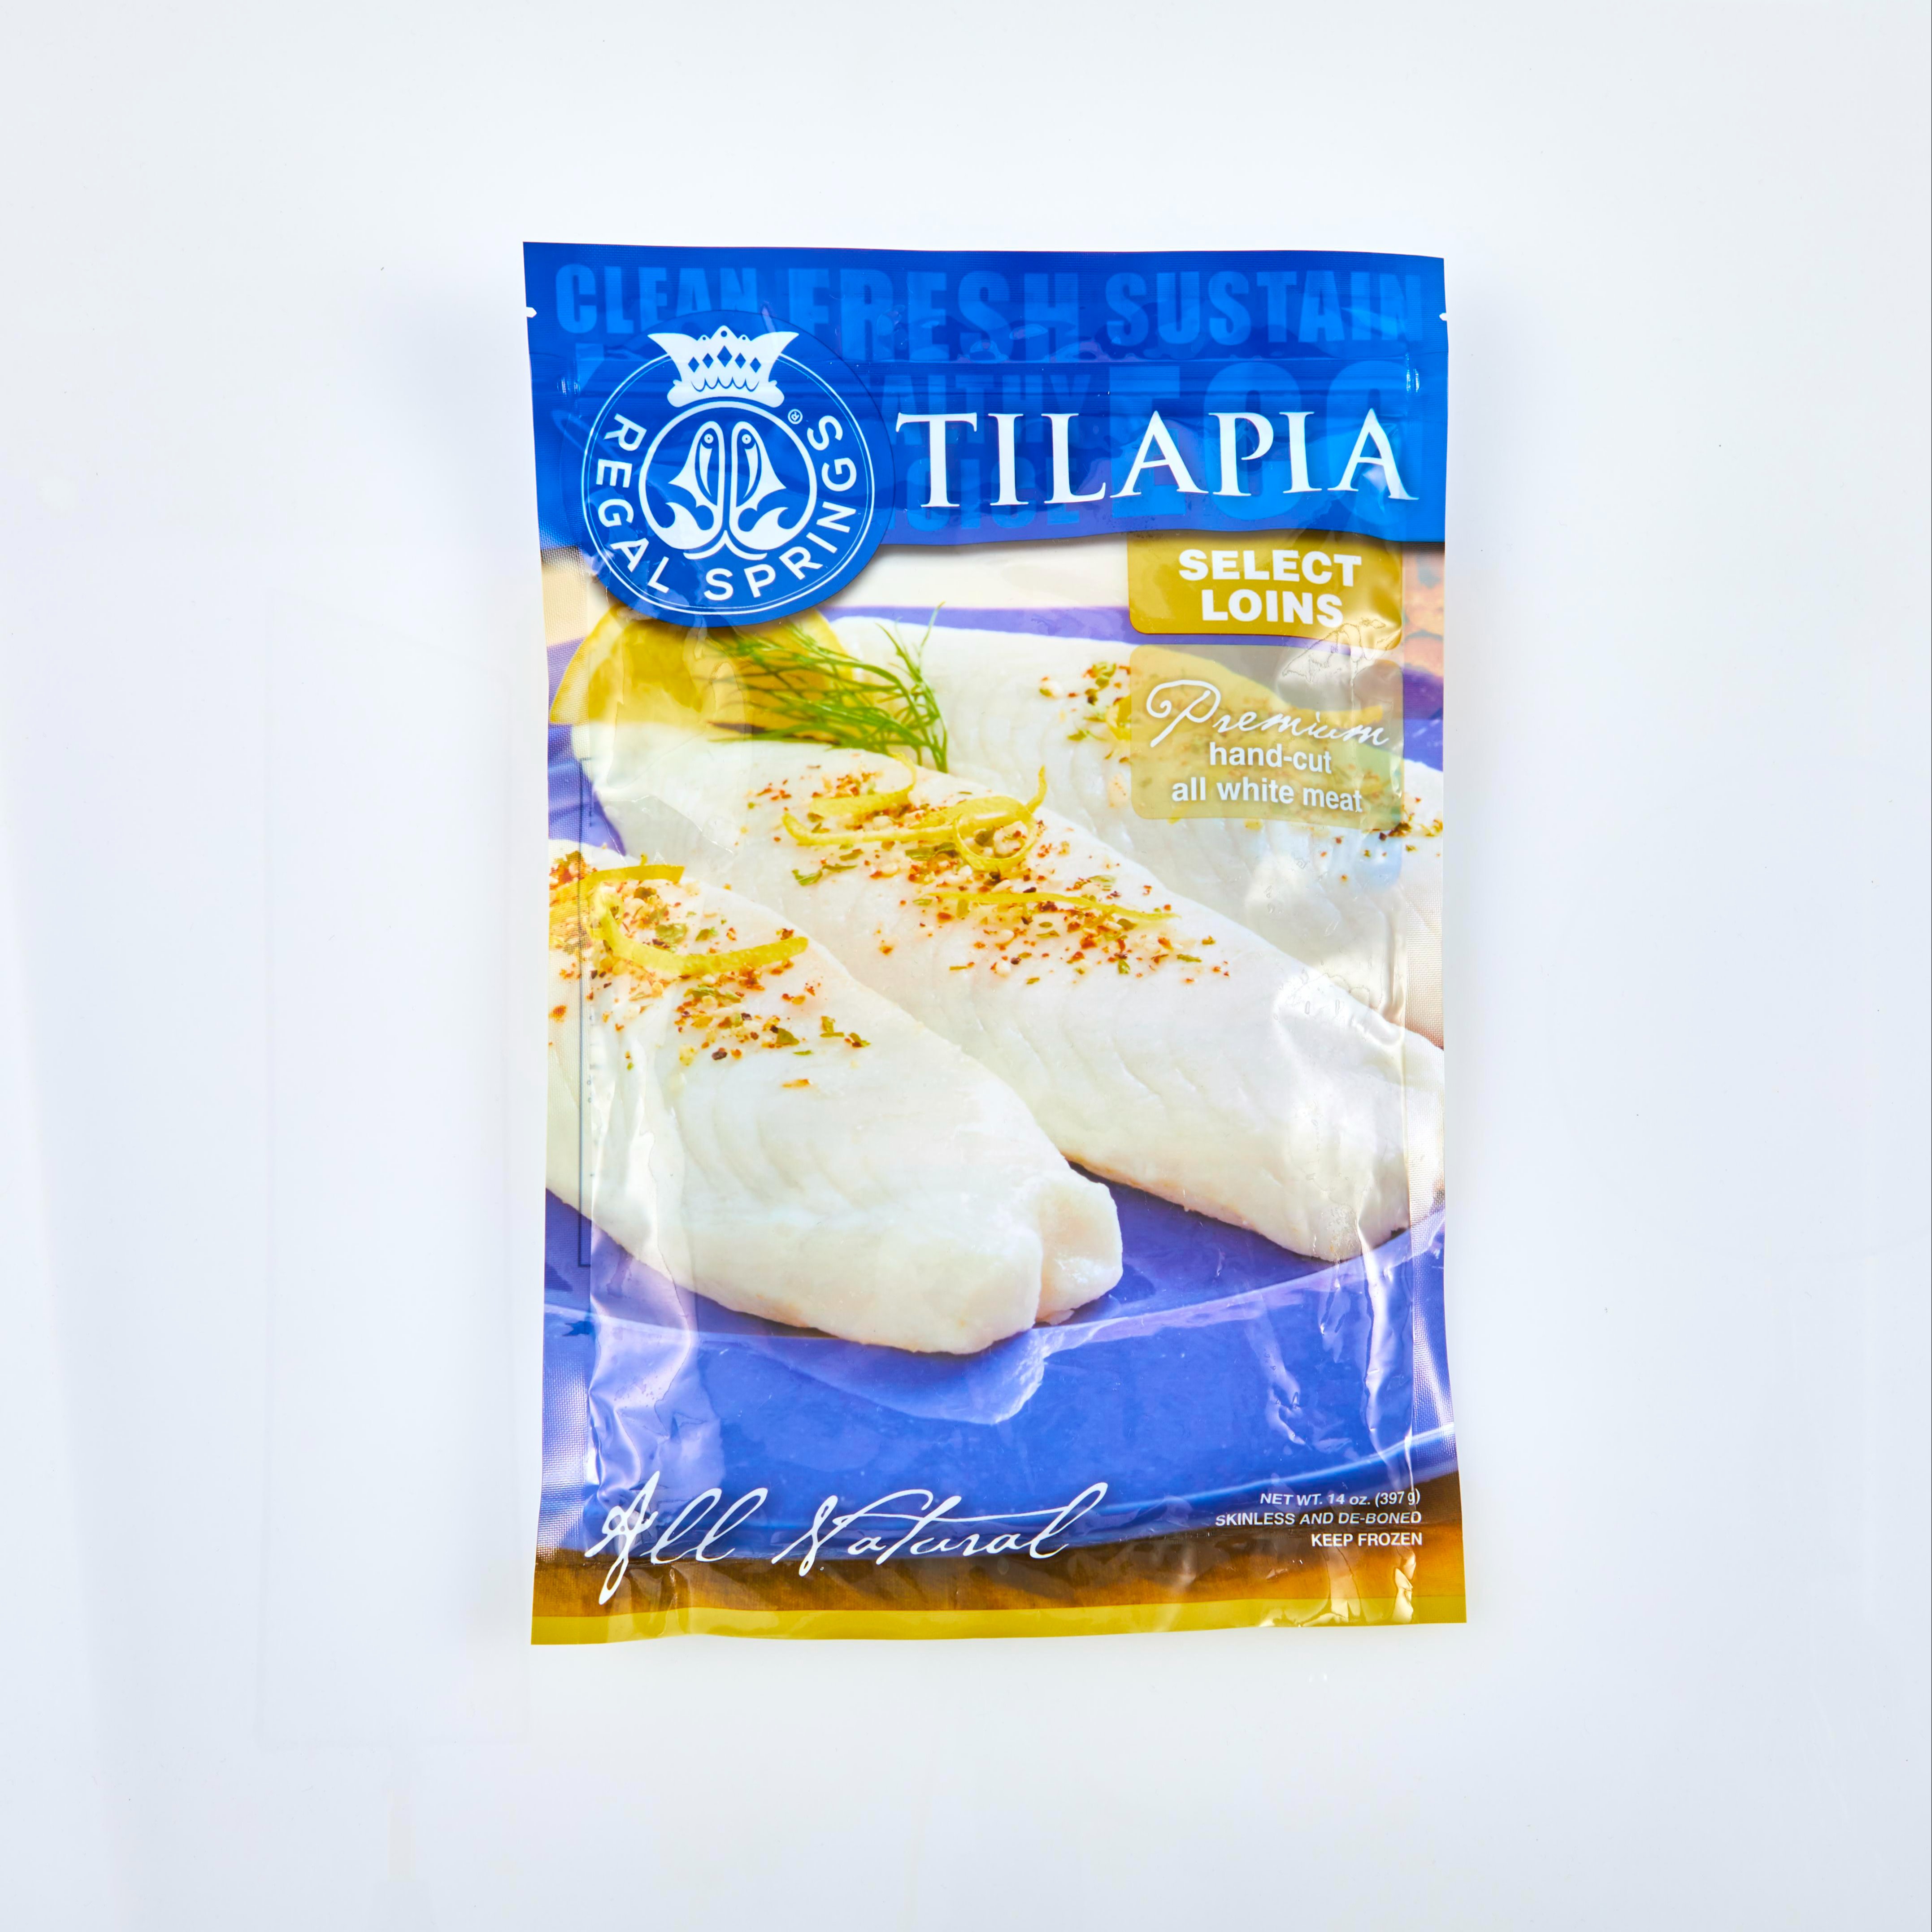 6053 WF PACKAGED tilapia SEAFOOD